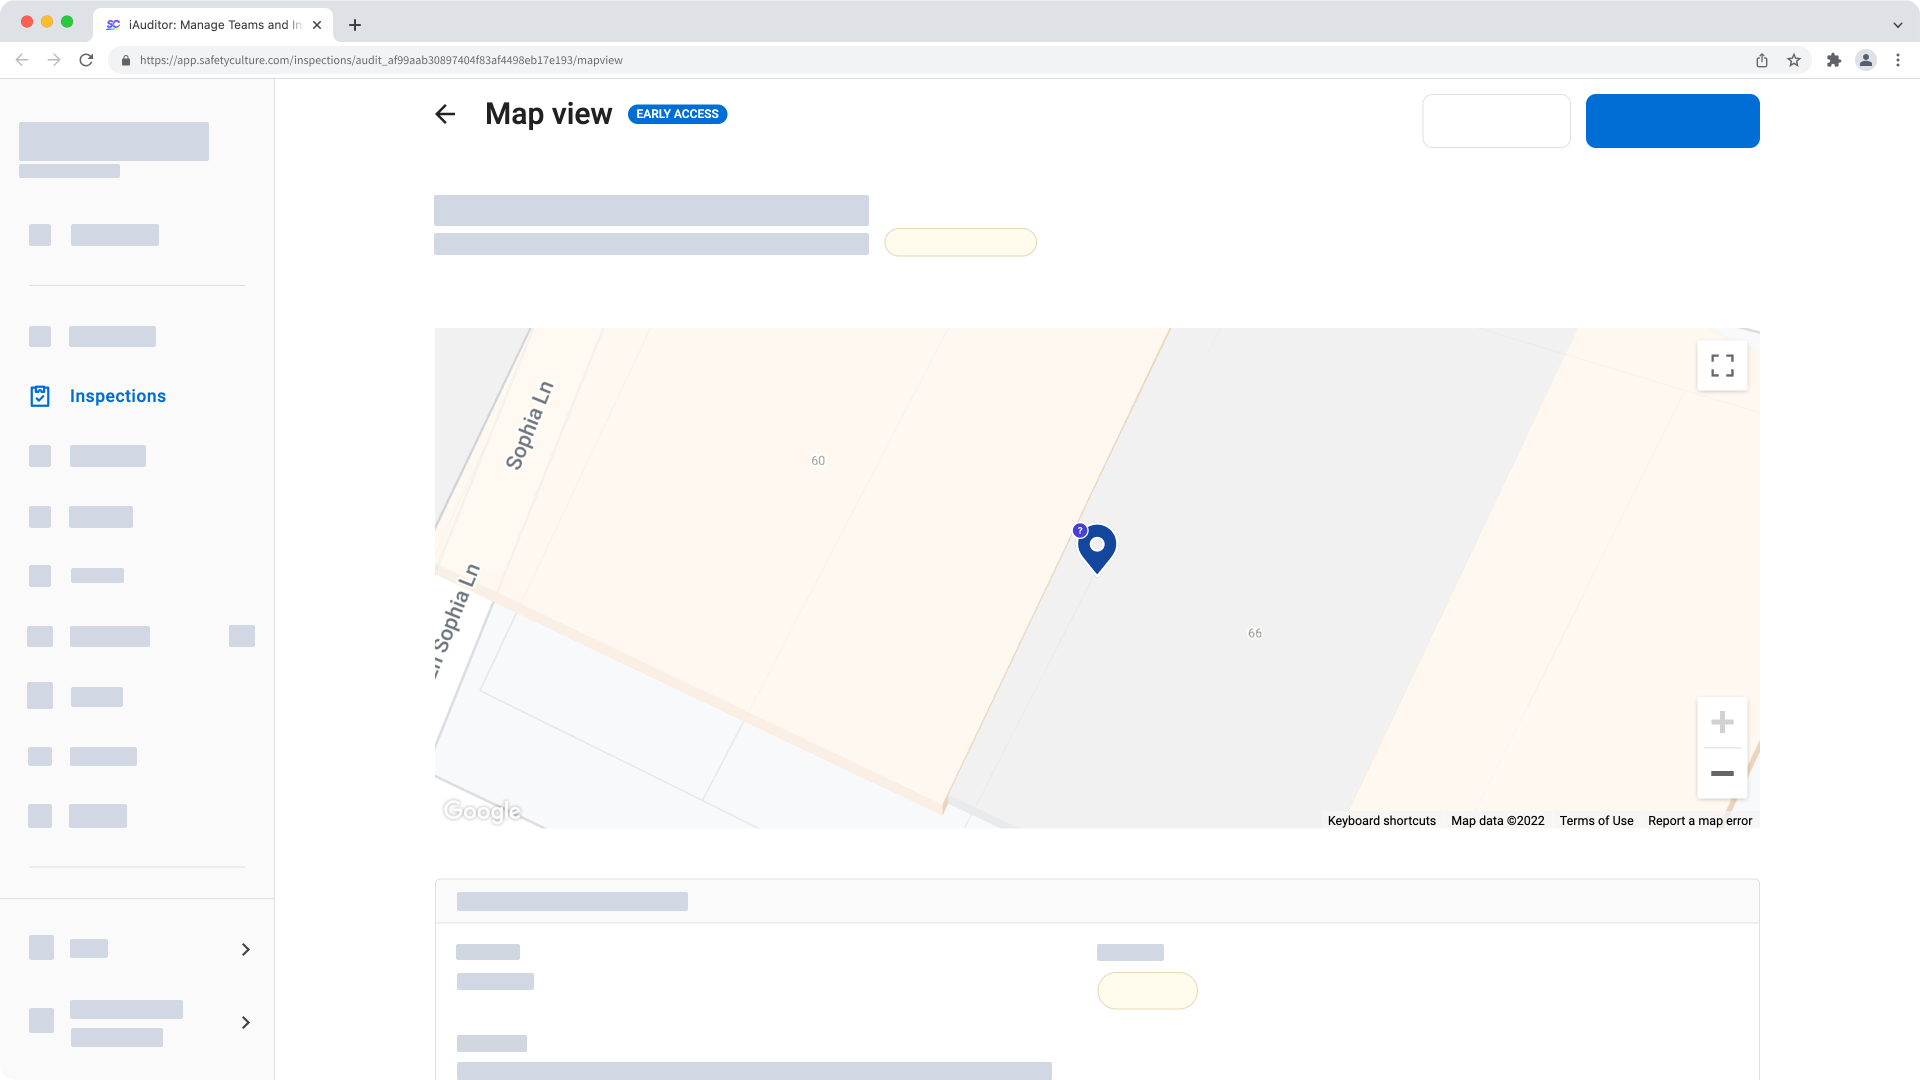 View the response location of an inspection as a marker on a map via the web app.